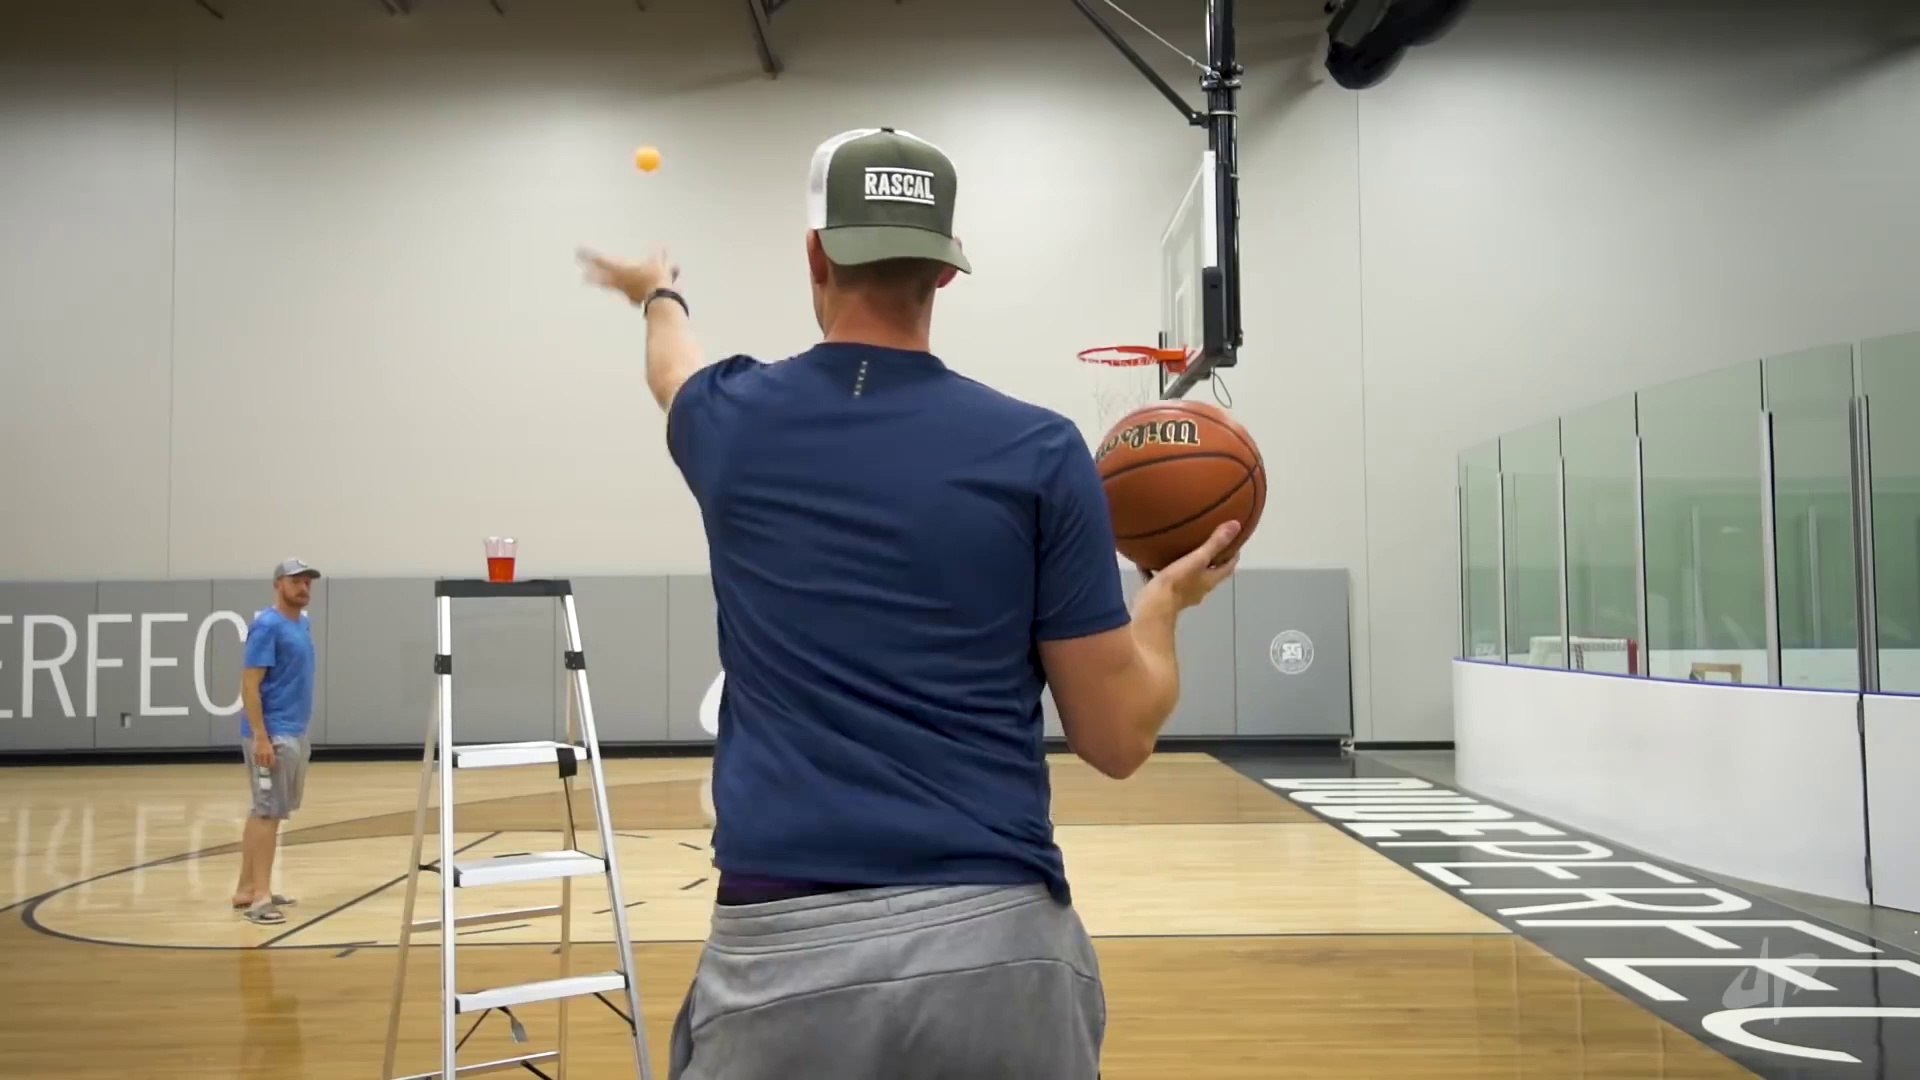 Ping Pong Trick Shots 4 | Dude Perfect - video Dailymotion